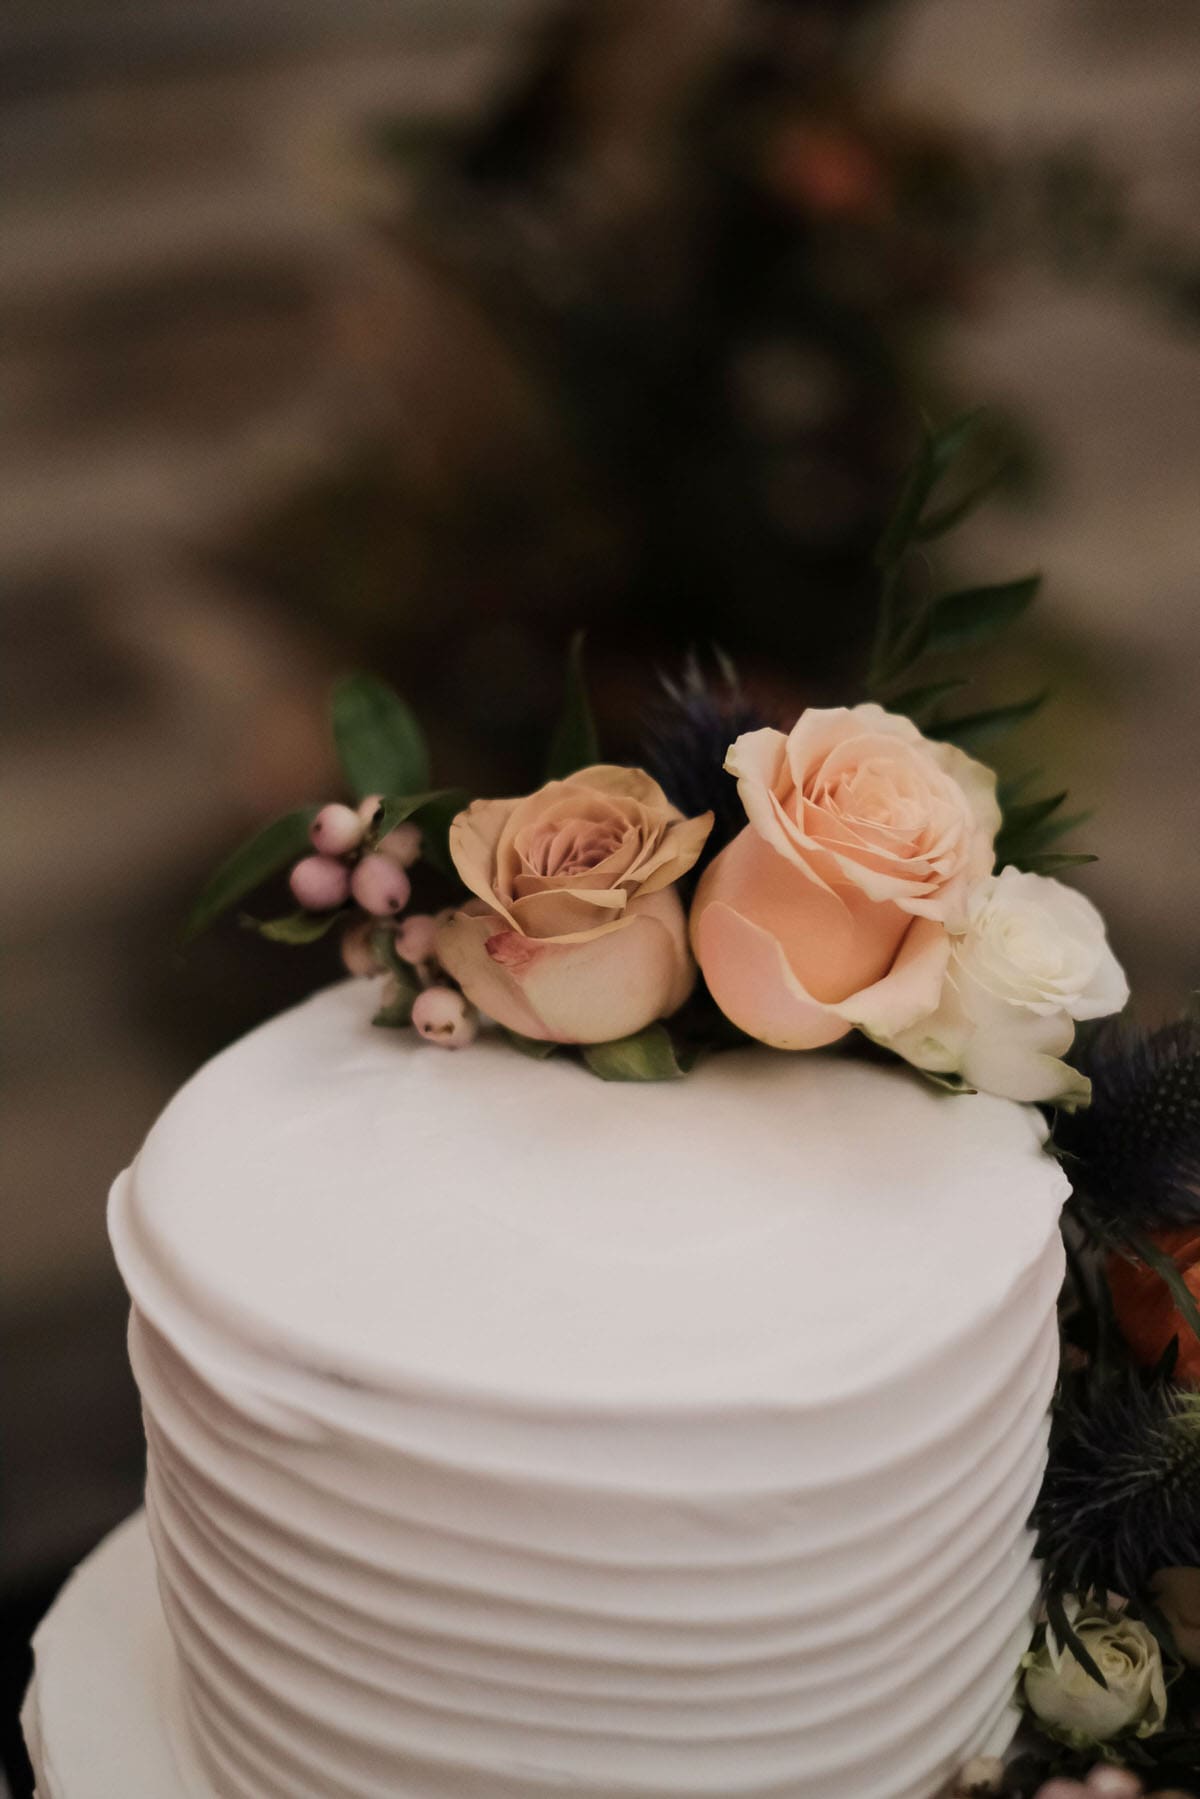 White buttercream icing cake with fresh flowers. Flavors almond dacquoise, crispy feuillantine and praline, and chocolate mousse #Whitebuttercream #icingcake #freshflowerscake #dacquoise #feuillantine